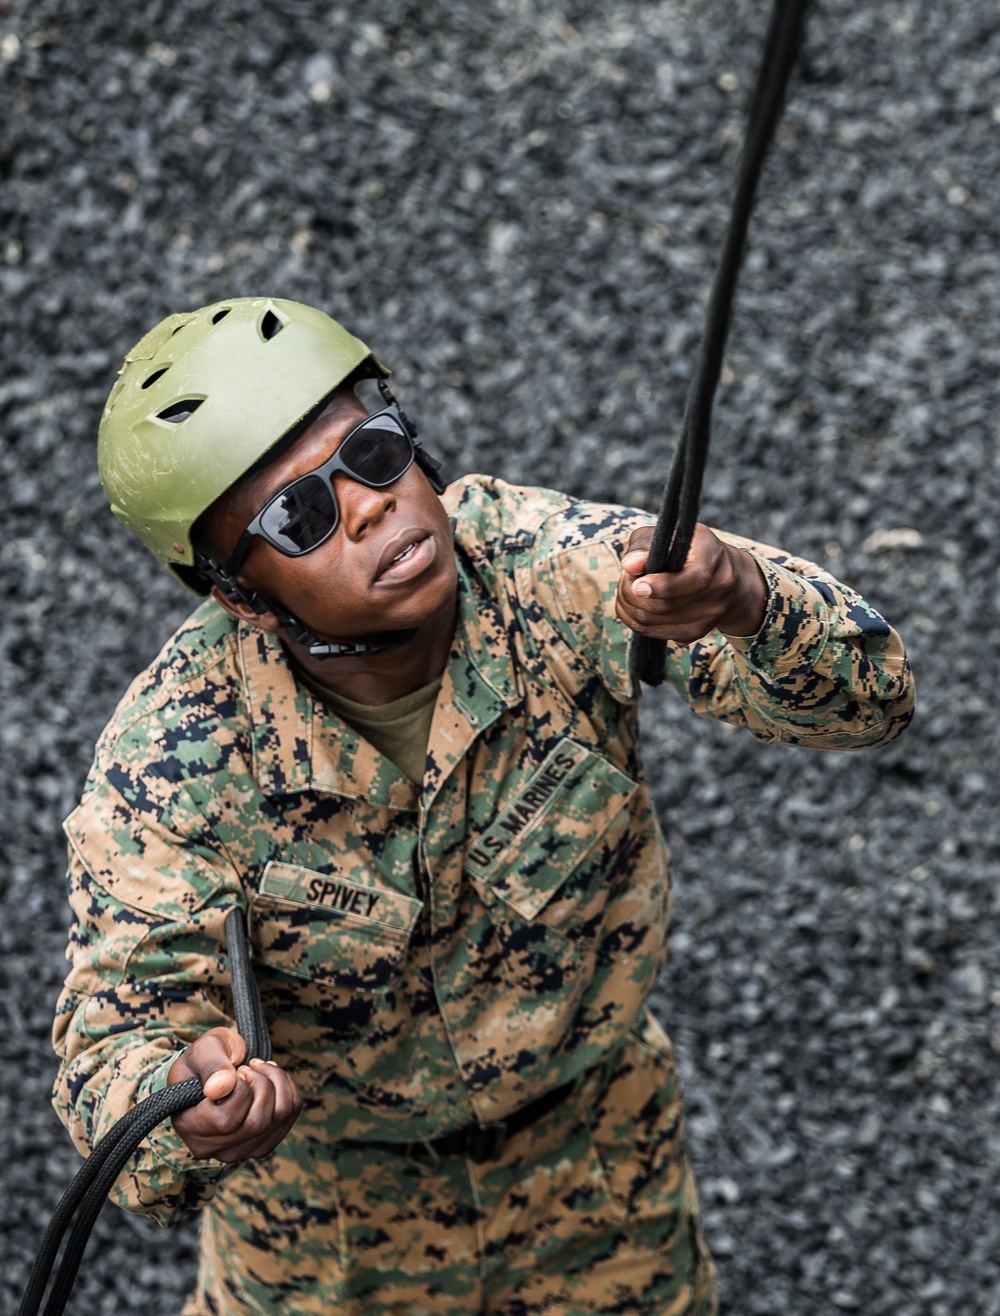 DVIDS - Images - Okinawa service members learn how to rappel and fast rope  [Image 8 of 12]